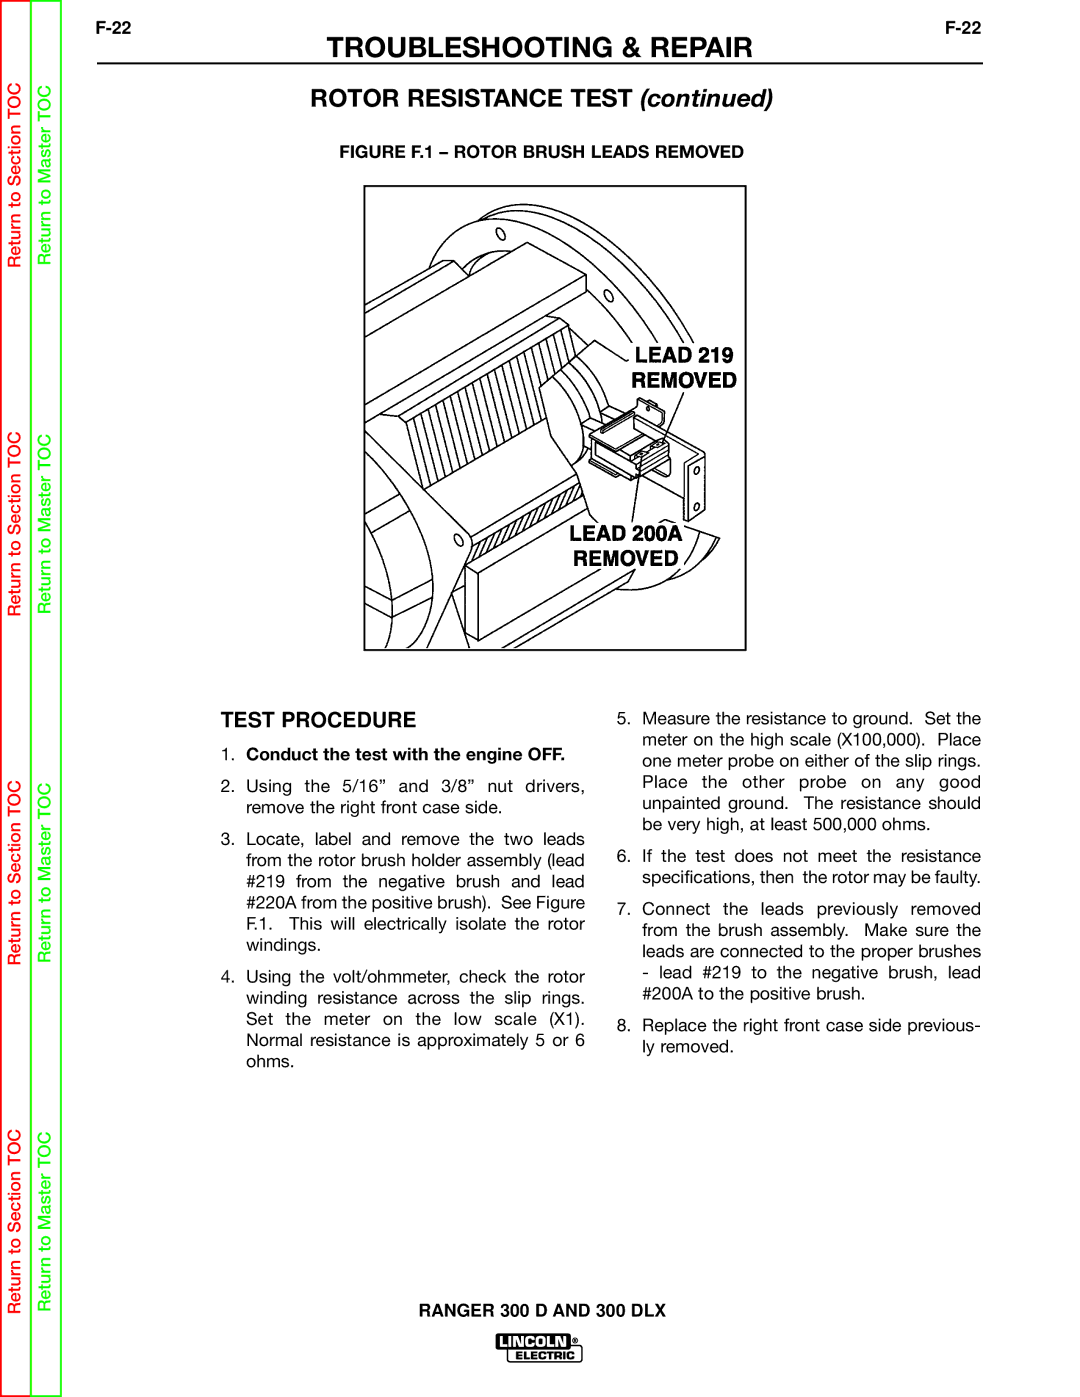 Lincoln Electric SVM148-B service manual Rotor Resistance Test, Test Procedure, Conduct the test with the engine OFF 